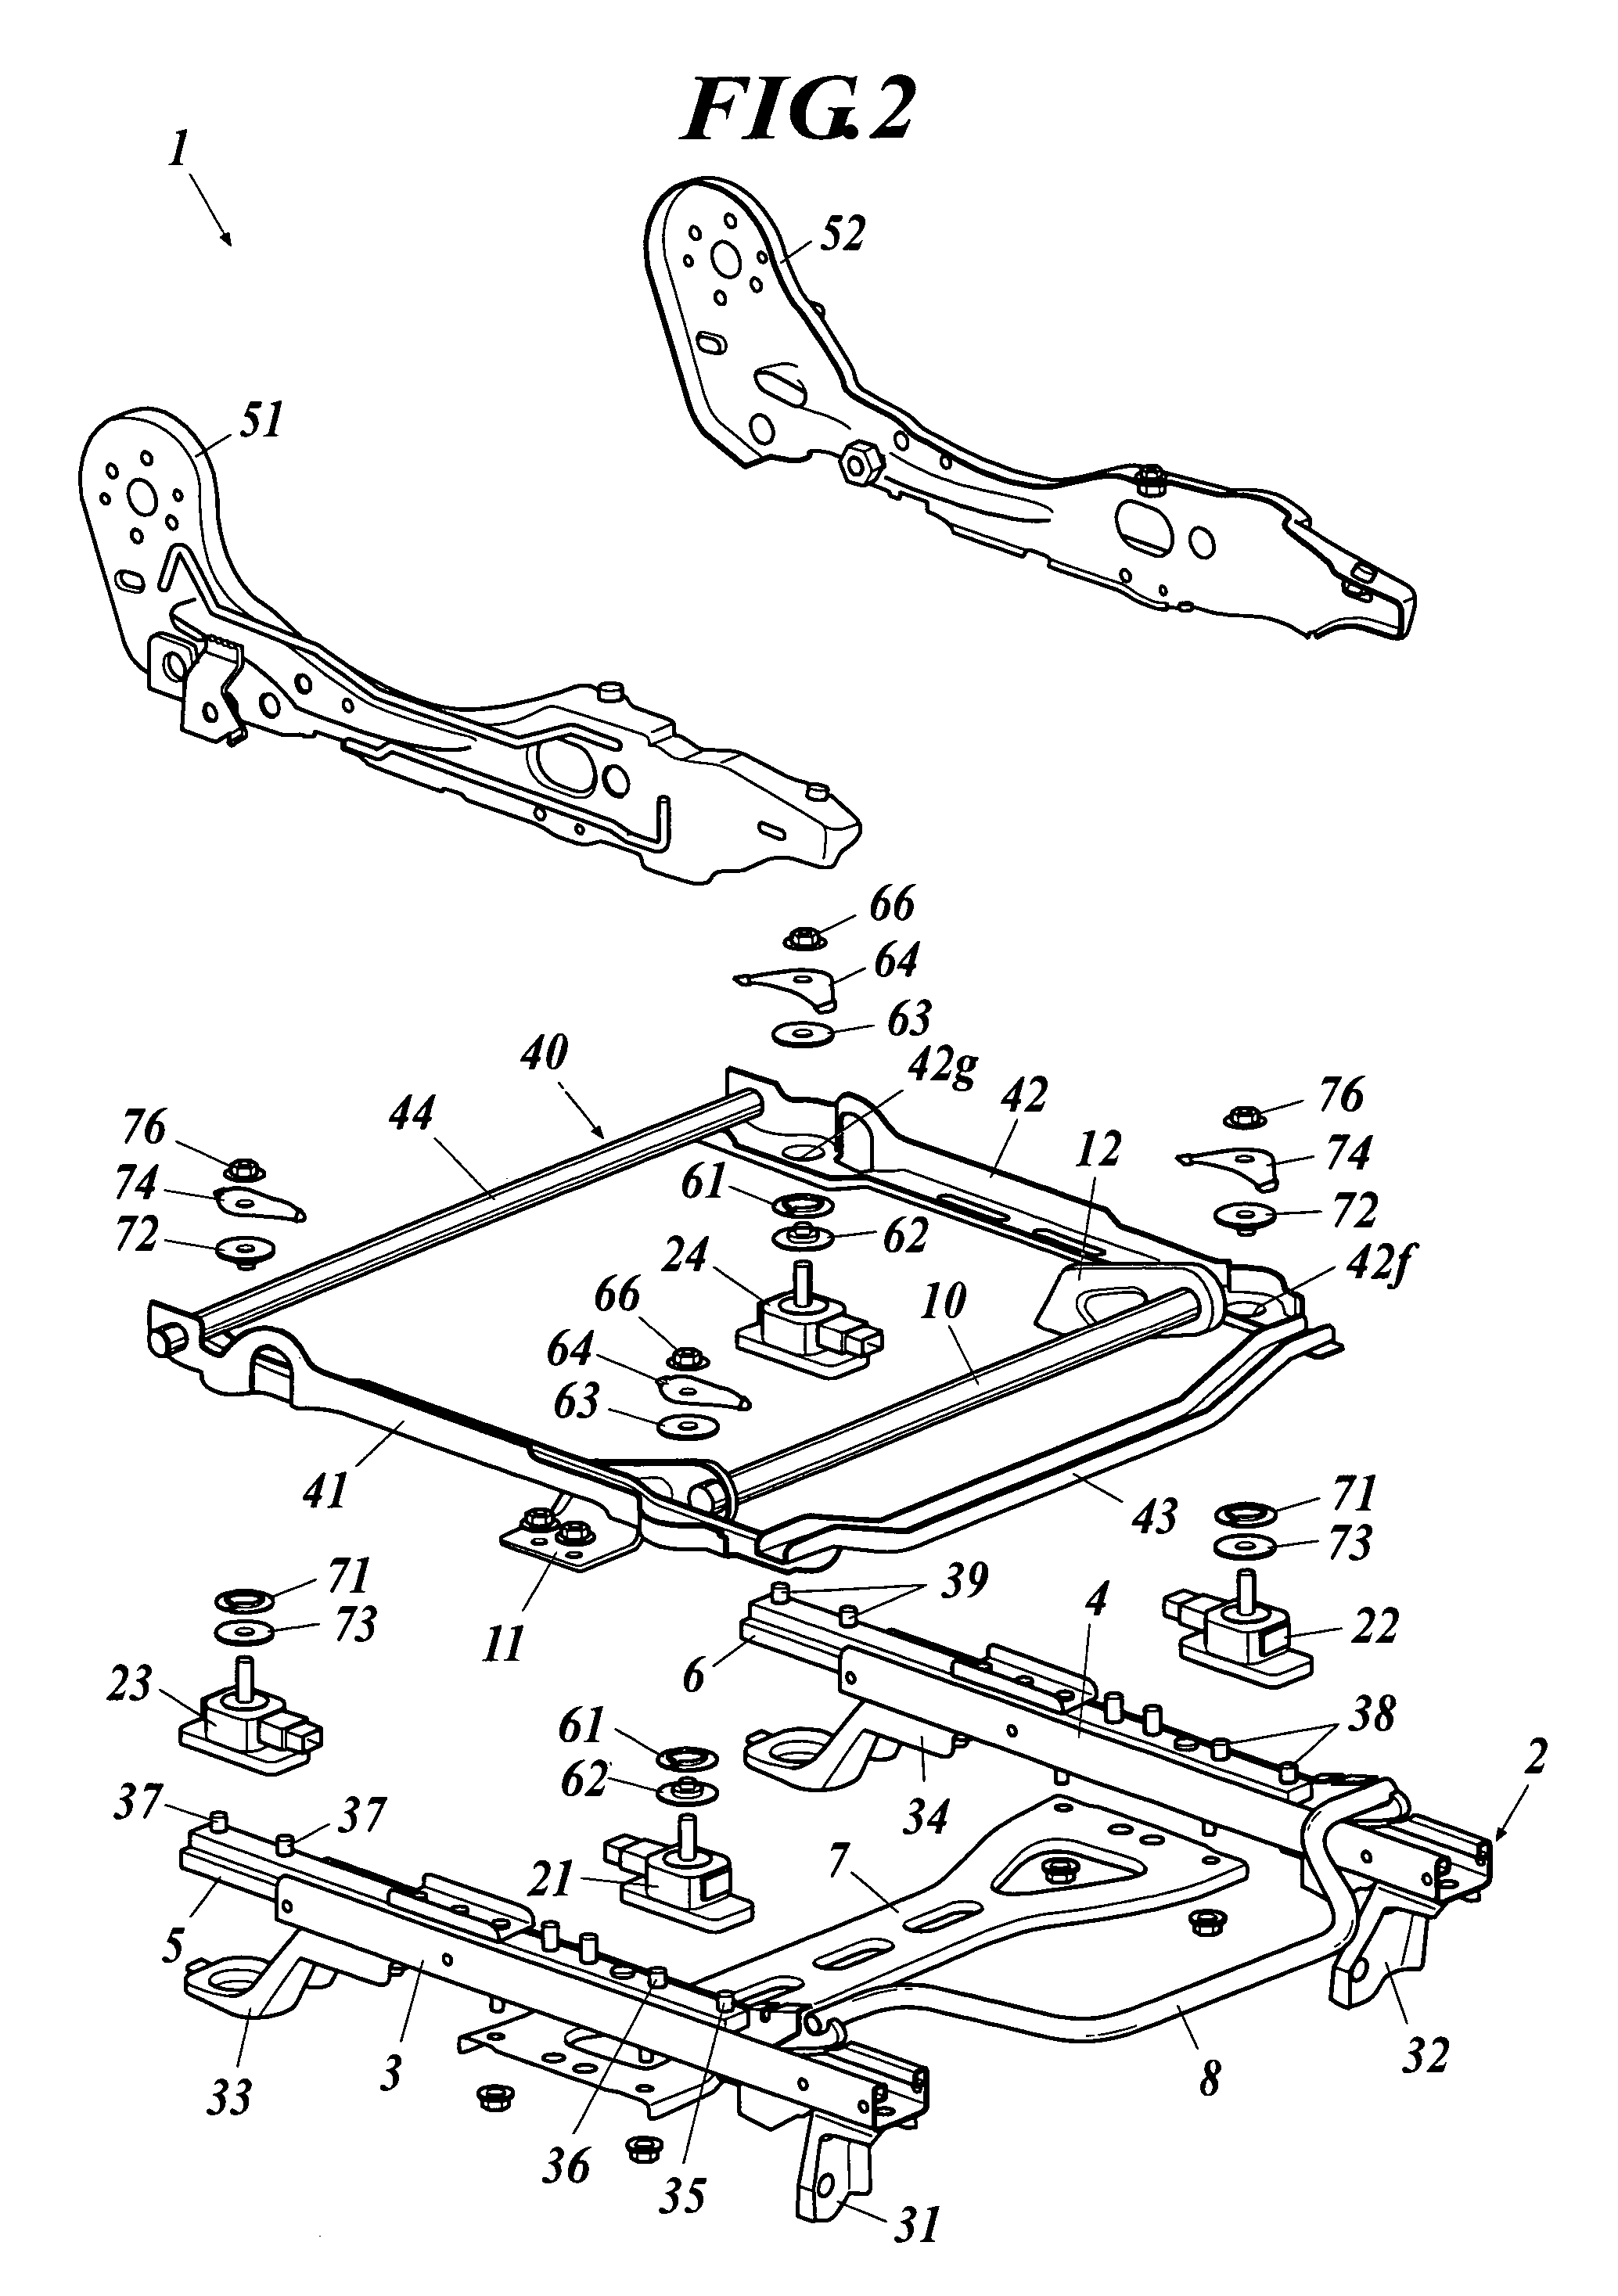 Passenger's weight measurement device for vehicle seat and attachment structure for load sensor